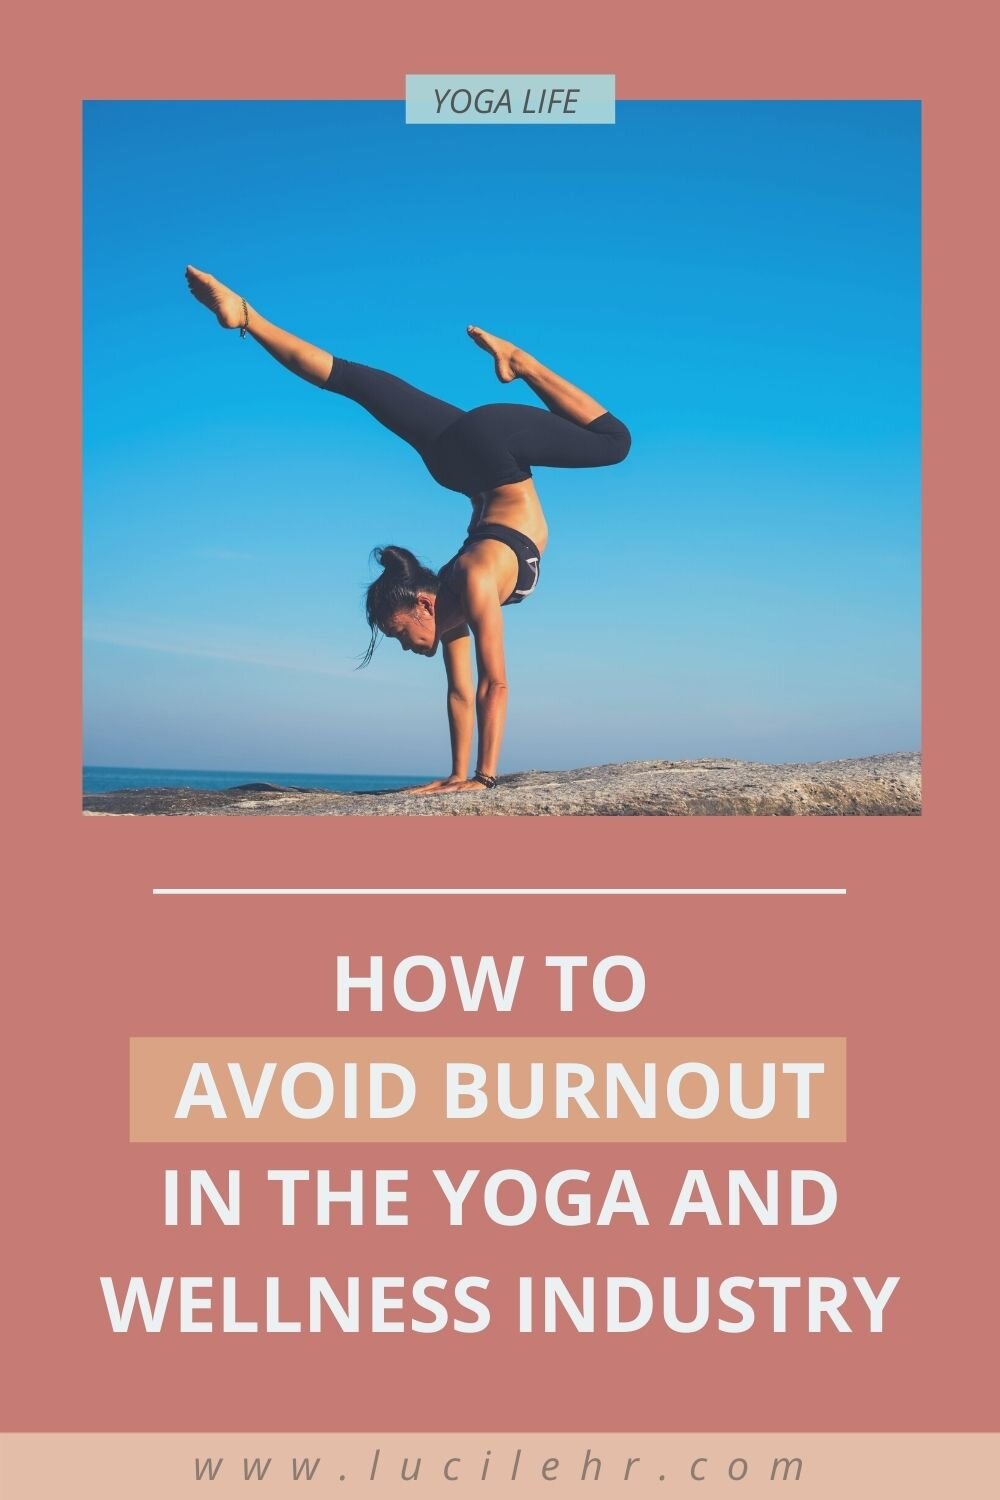 Beating Burnout: The Benefits of Yoga for Nurses